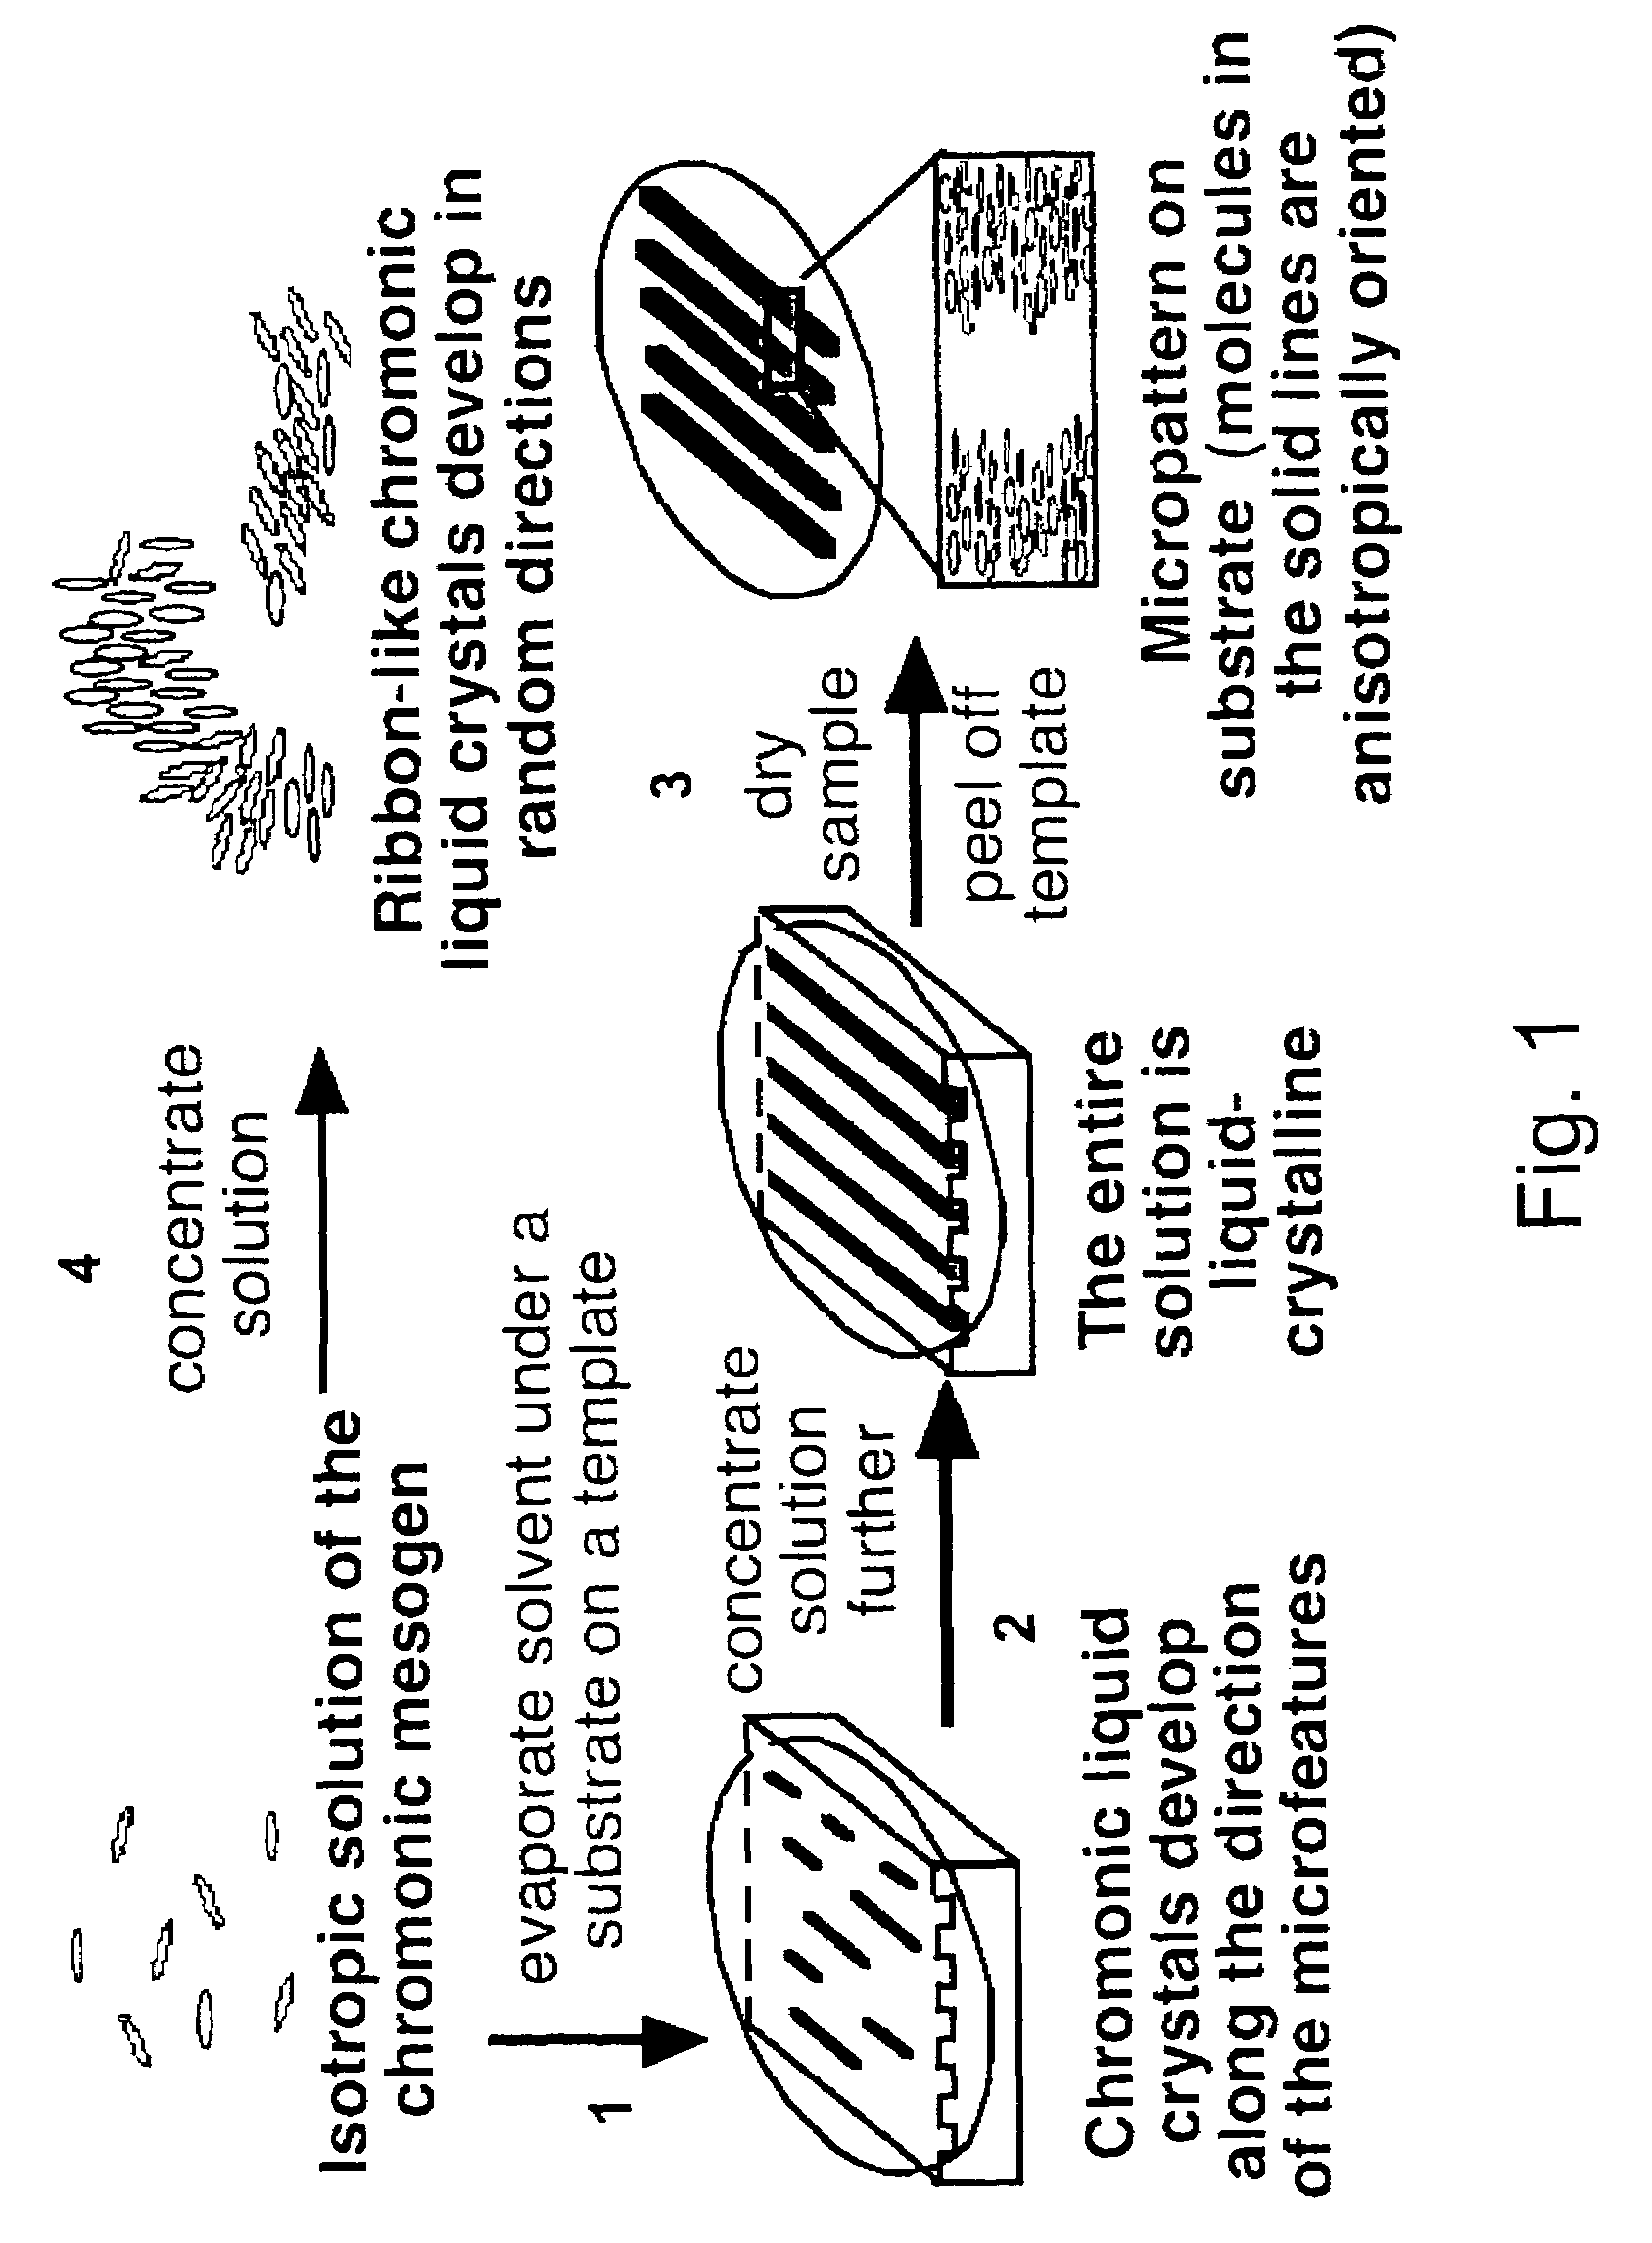 Materials and methods for the preparation of anisotropically-ordered solids